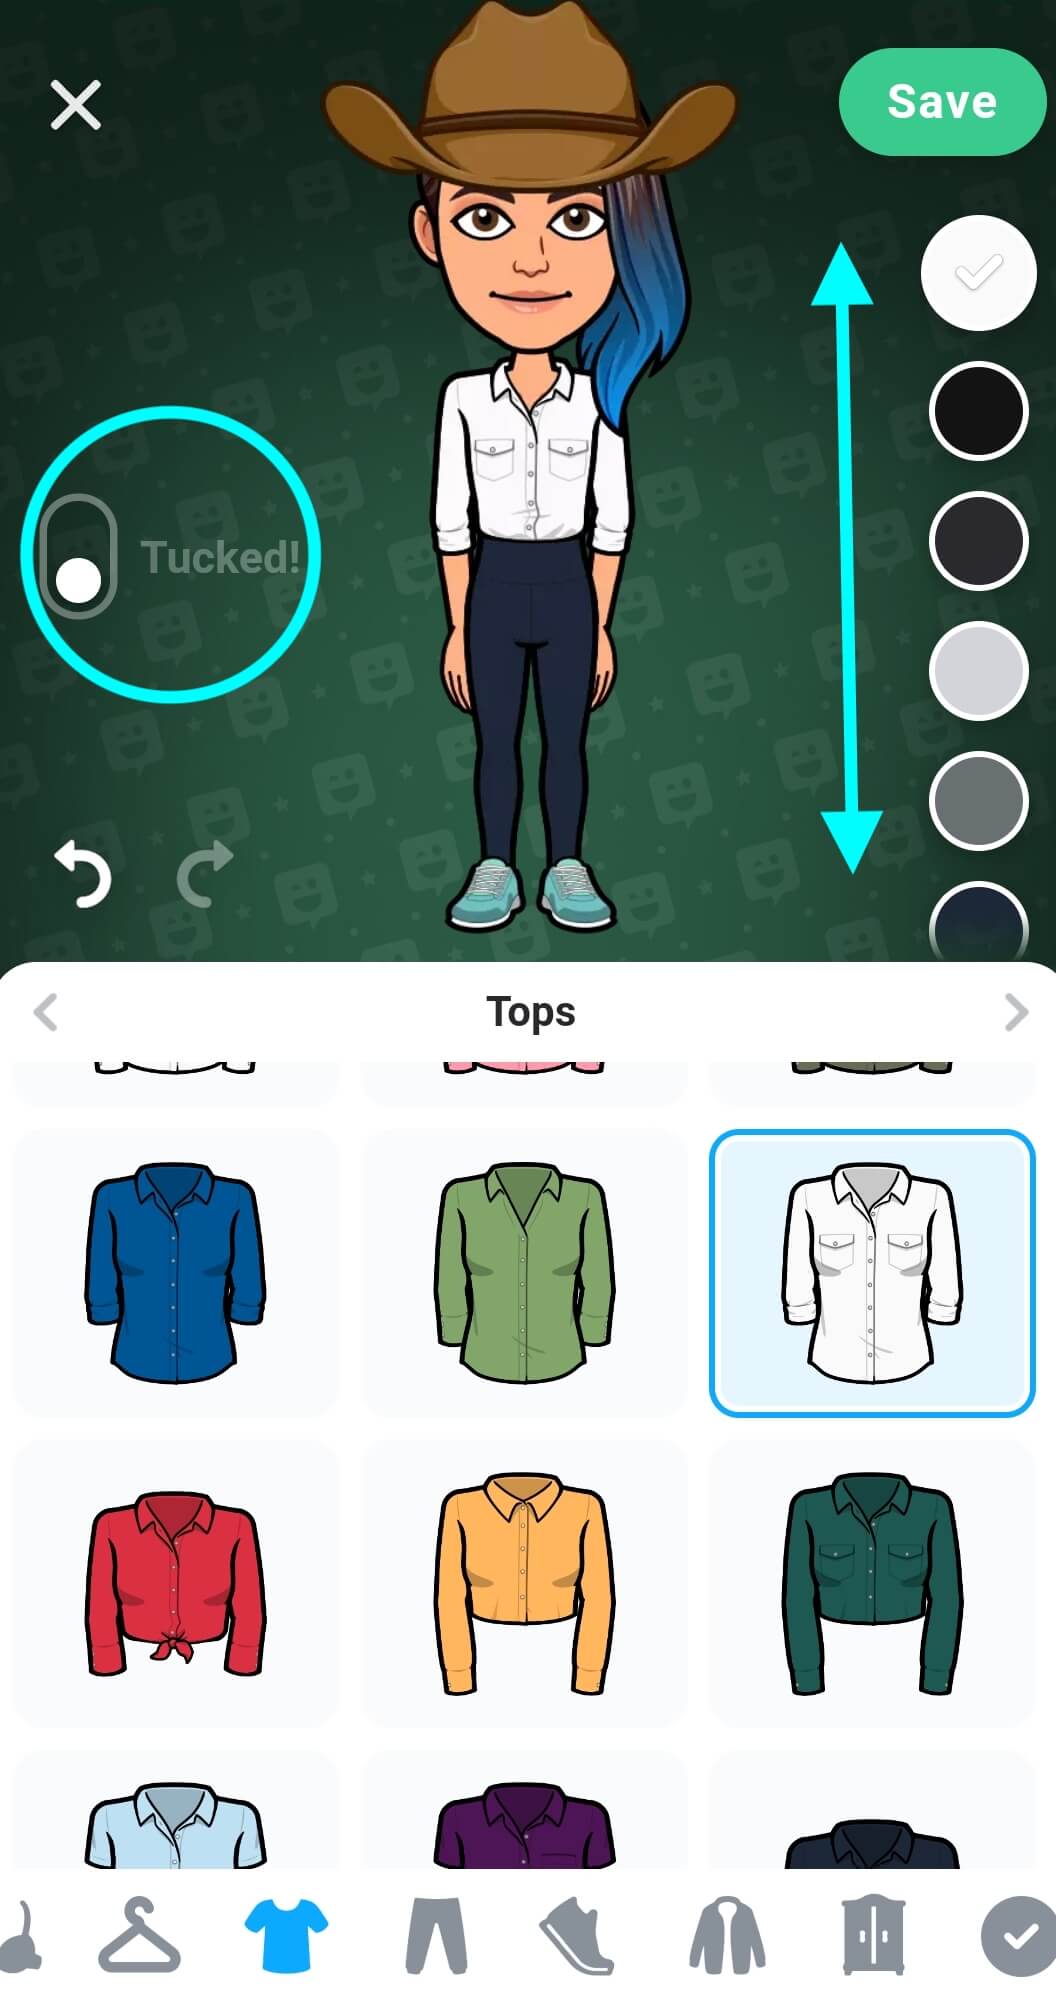 The toggle that tucks in a top located on the left is highlighted. The colour palette is on the right, with arrows to indicate to swipe up or down for more colour options.